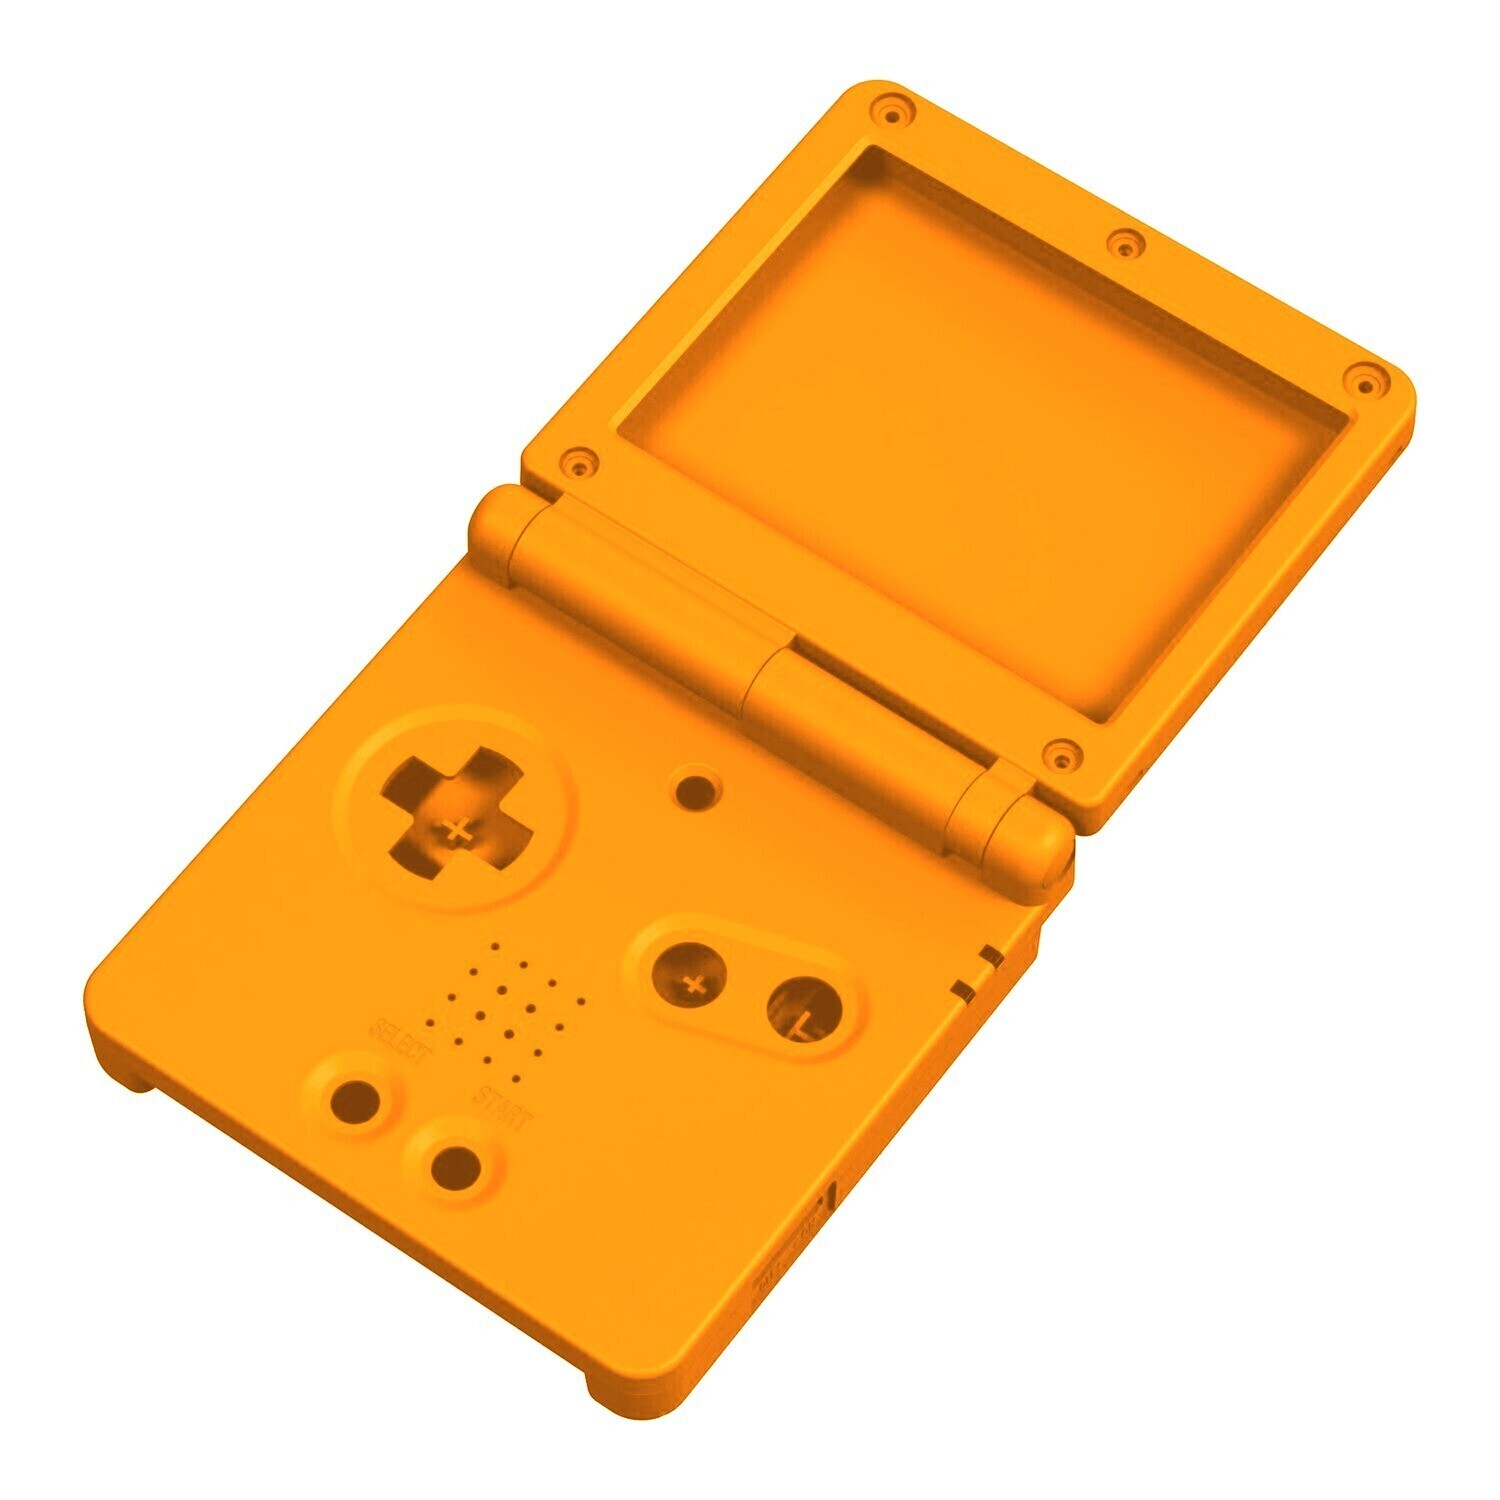 Game Boy Advance SP Shell (Solid Yellow)